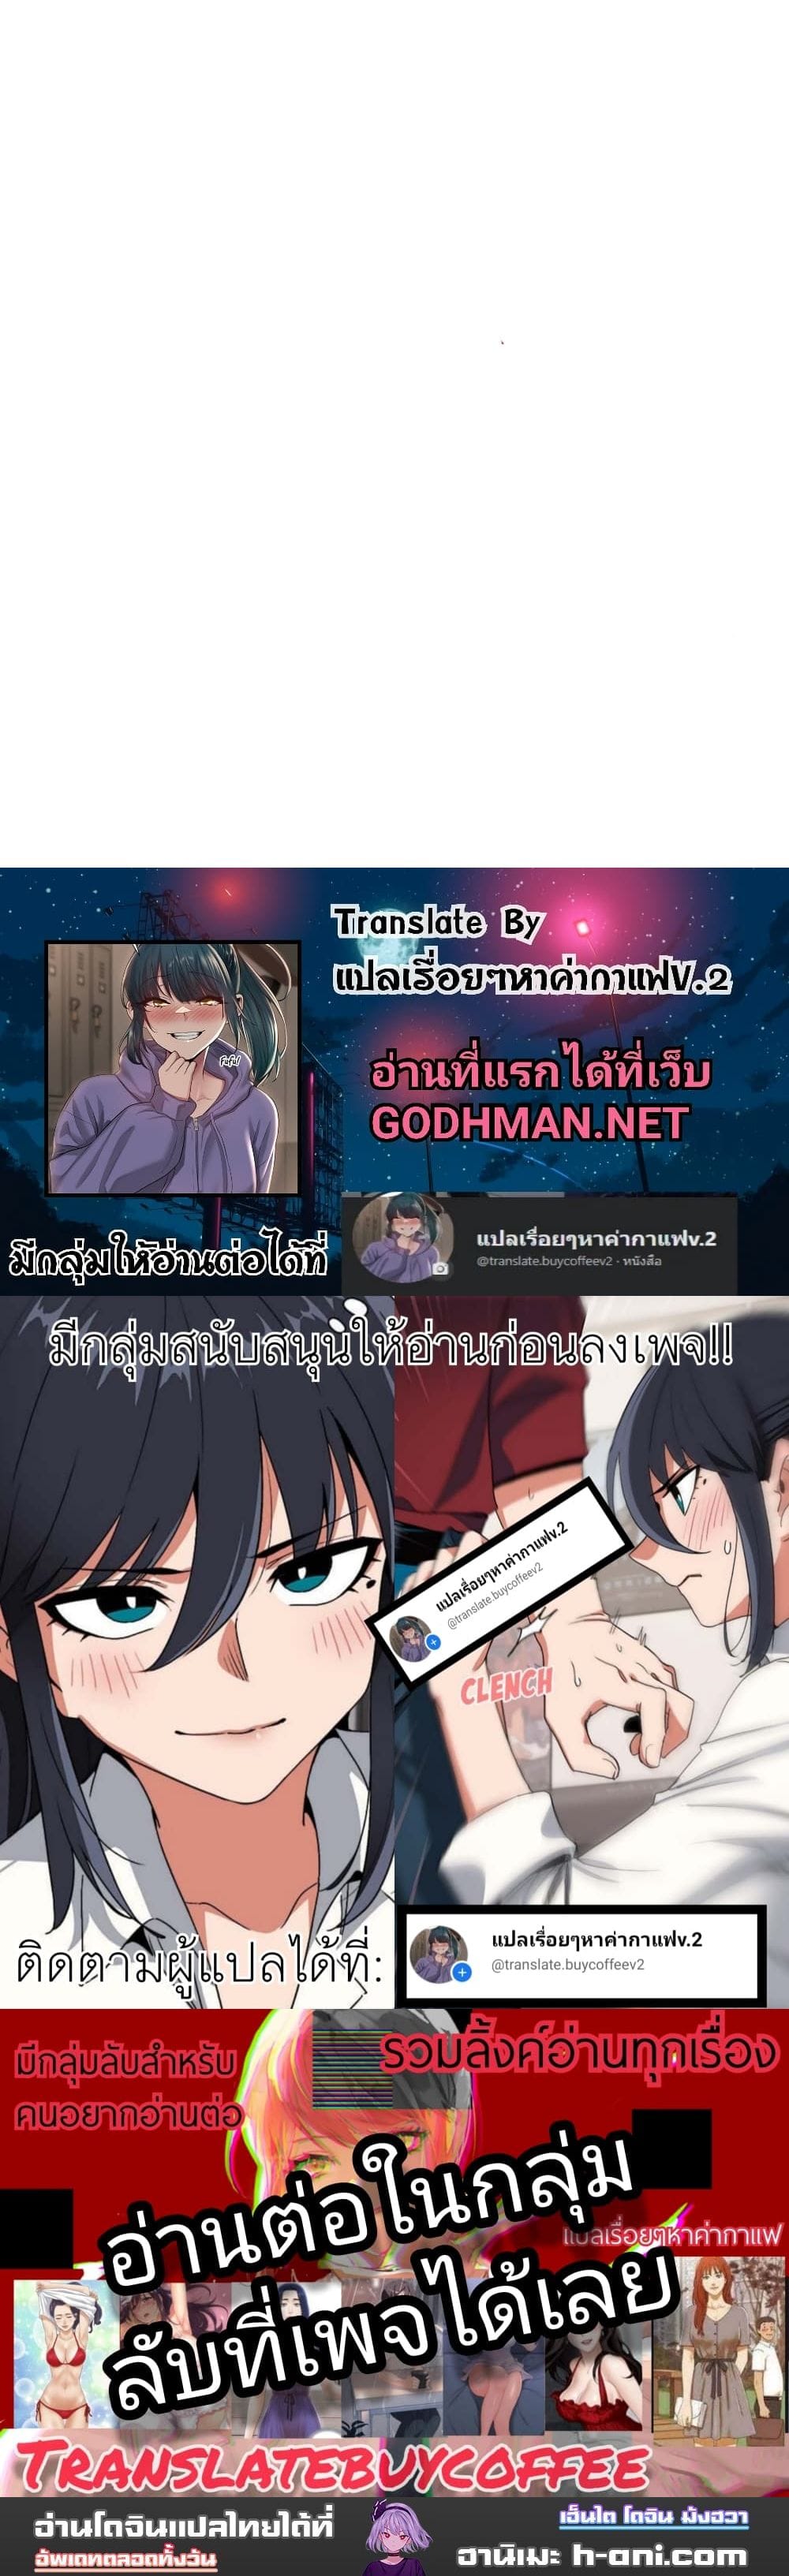 Outsider: The Invisible Man ตอนที่ 5 ภาพ 17